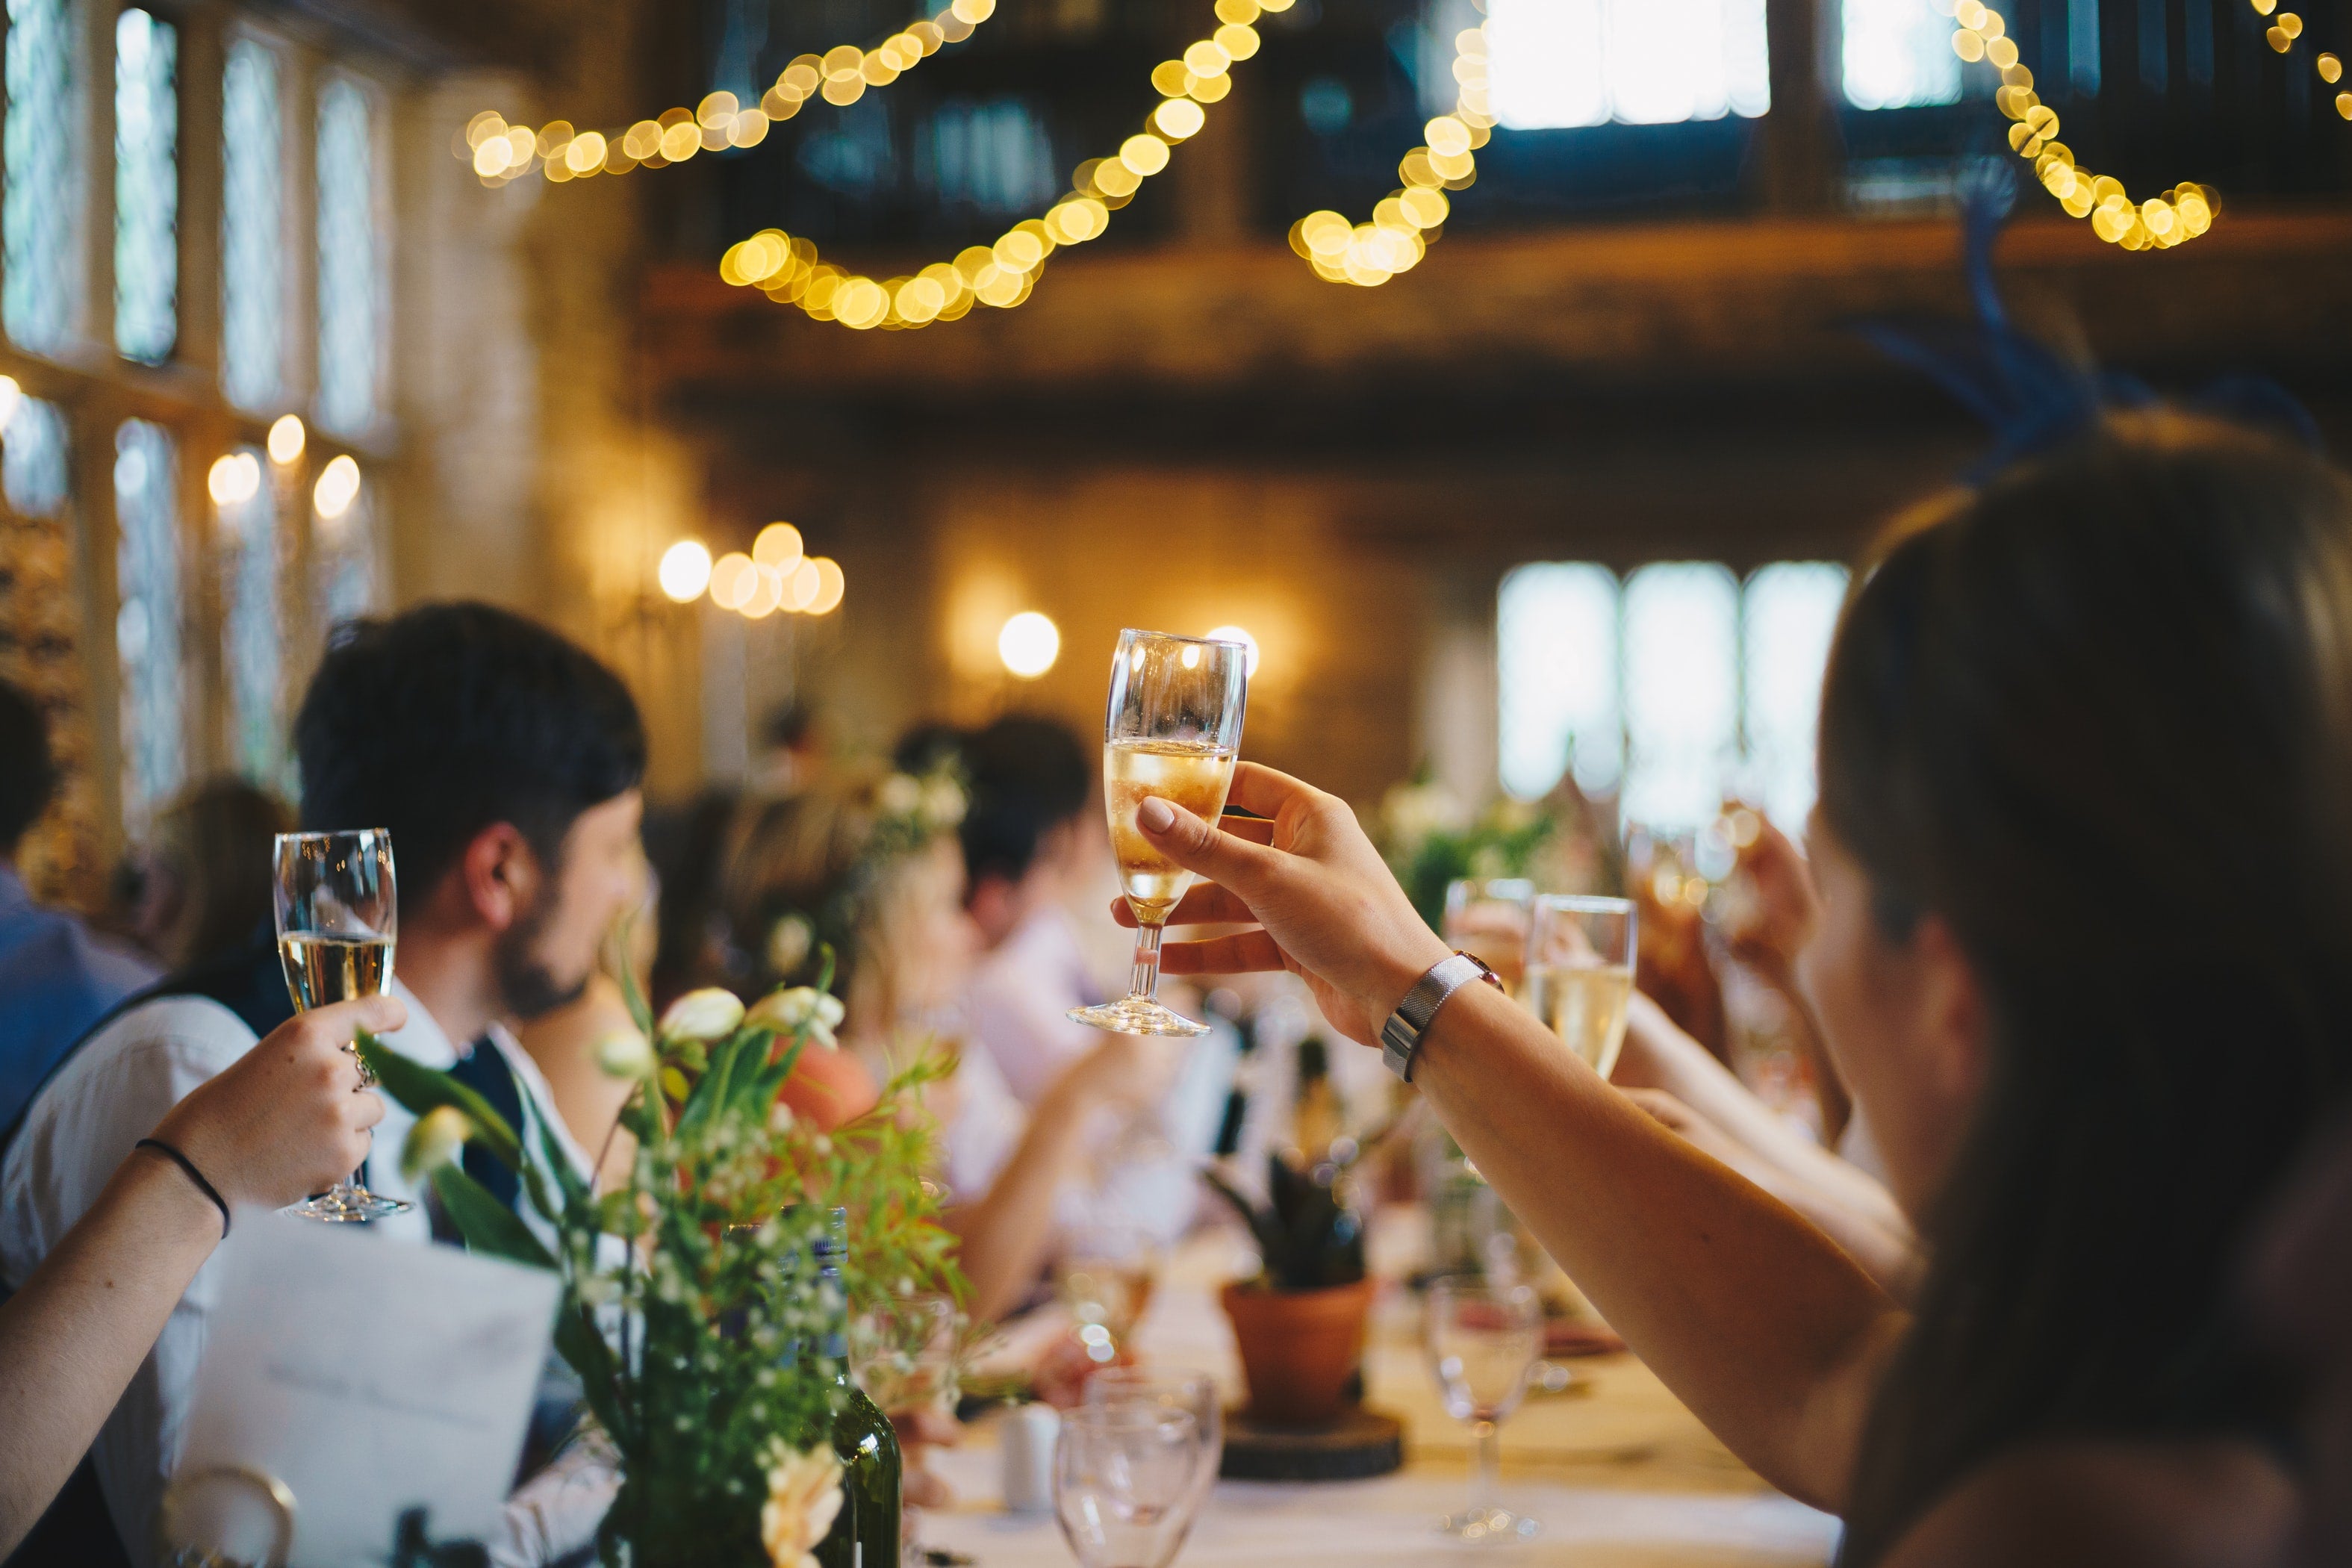 guests toasting with glasses of wine at wedding reception